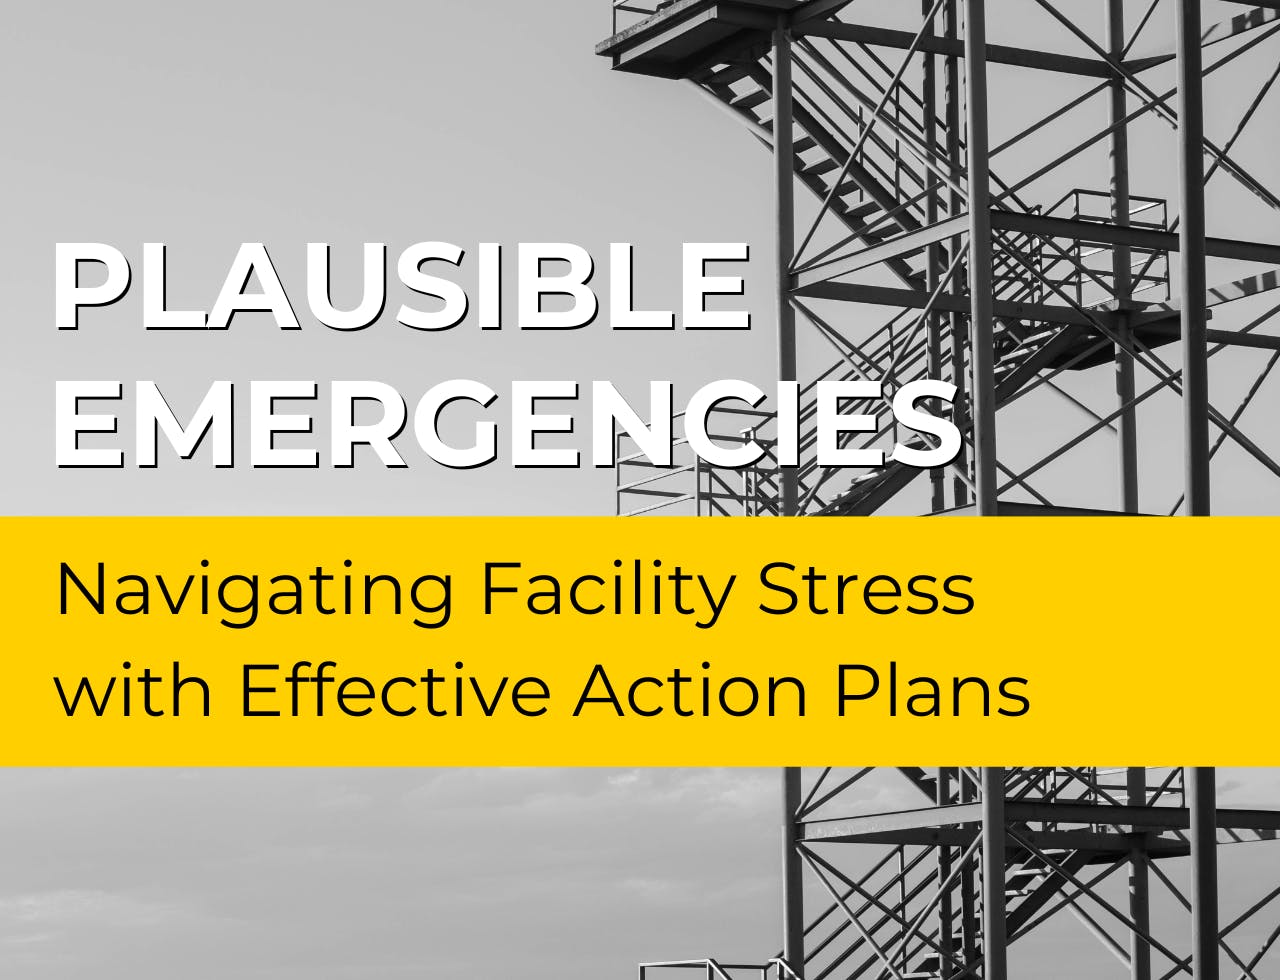 Plausible Emergencies: Navigating Facility Stress with Effective Action Plans